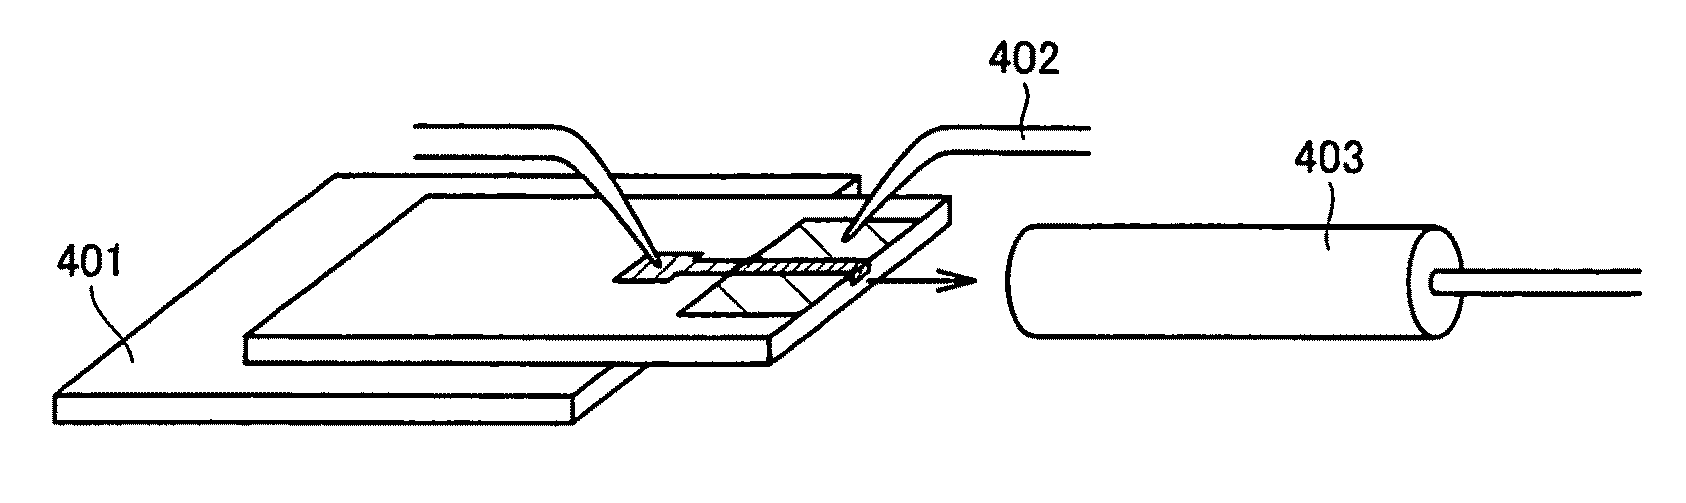 Organic electroluminescence device and organic laser diode